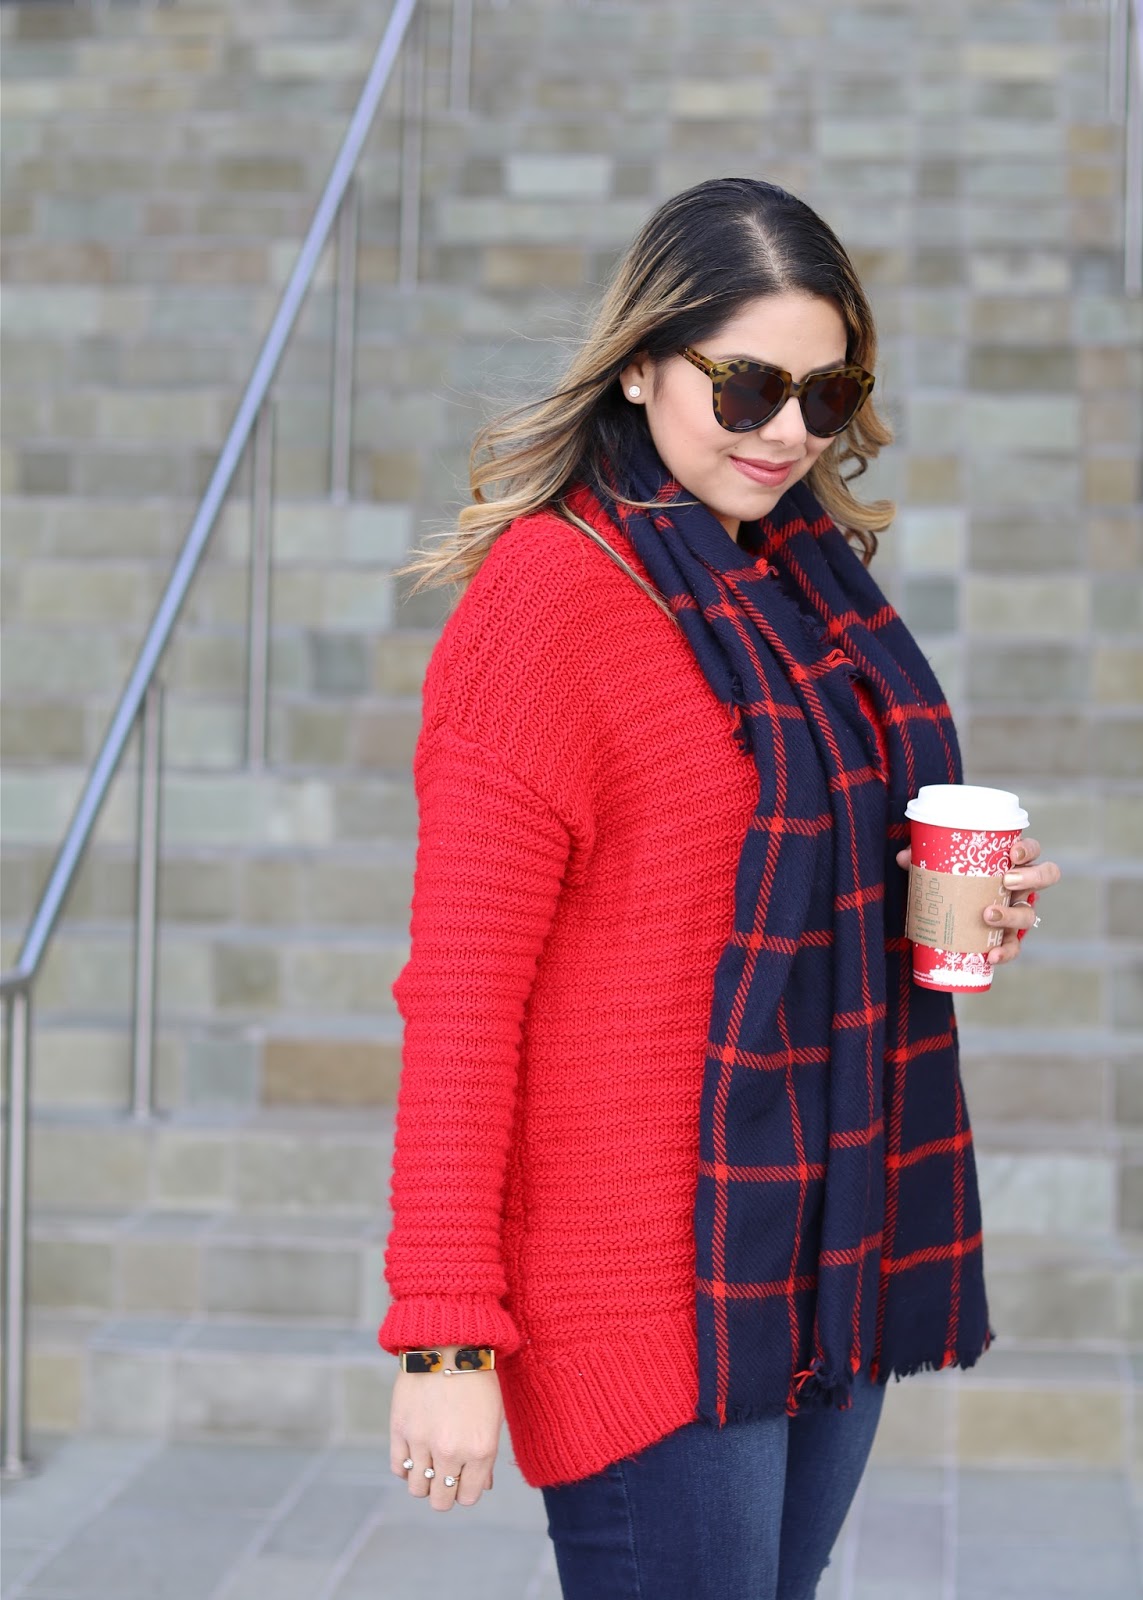 Red Knit Sweater Outfit - Lil bits of Chic